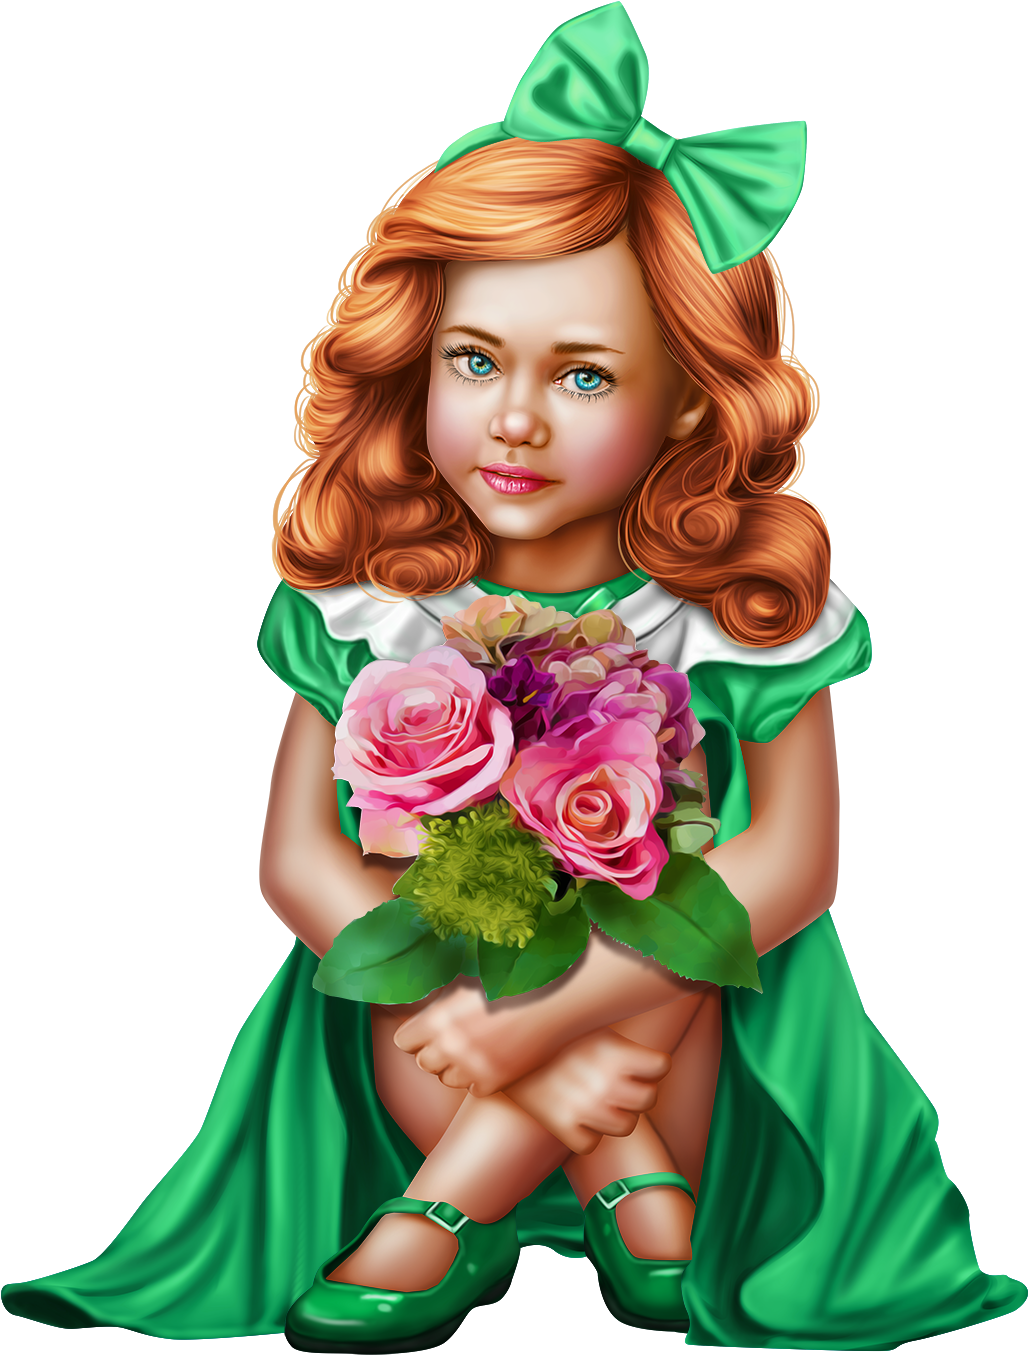 Amy-12 - Drawing Clipart - Large Size Png Image - PikPng